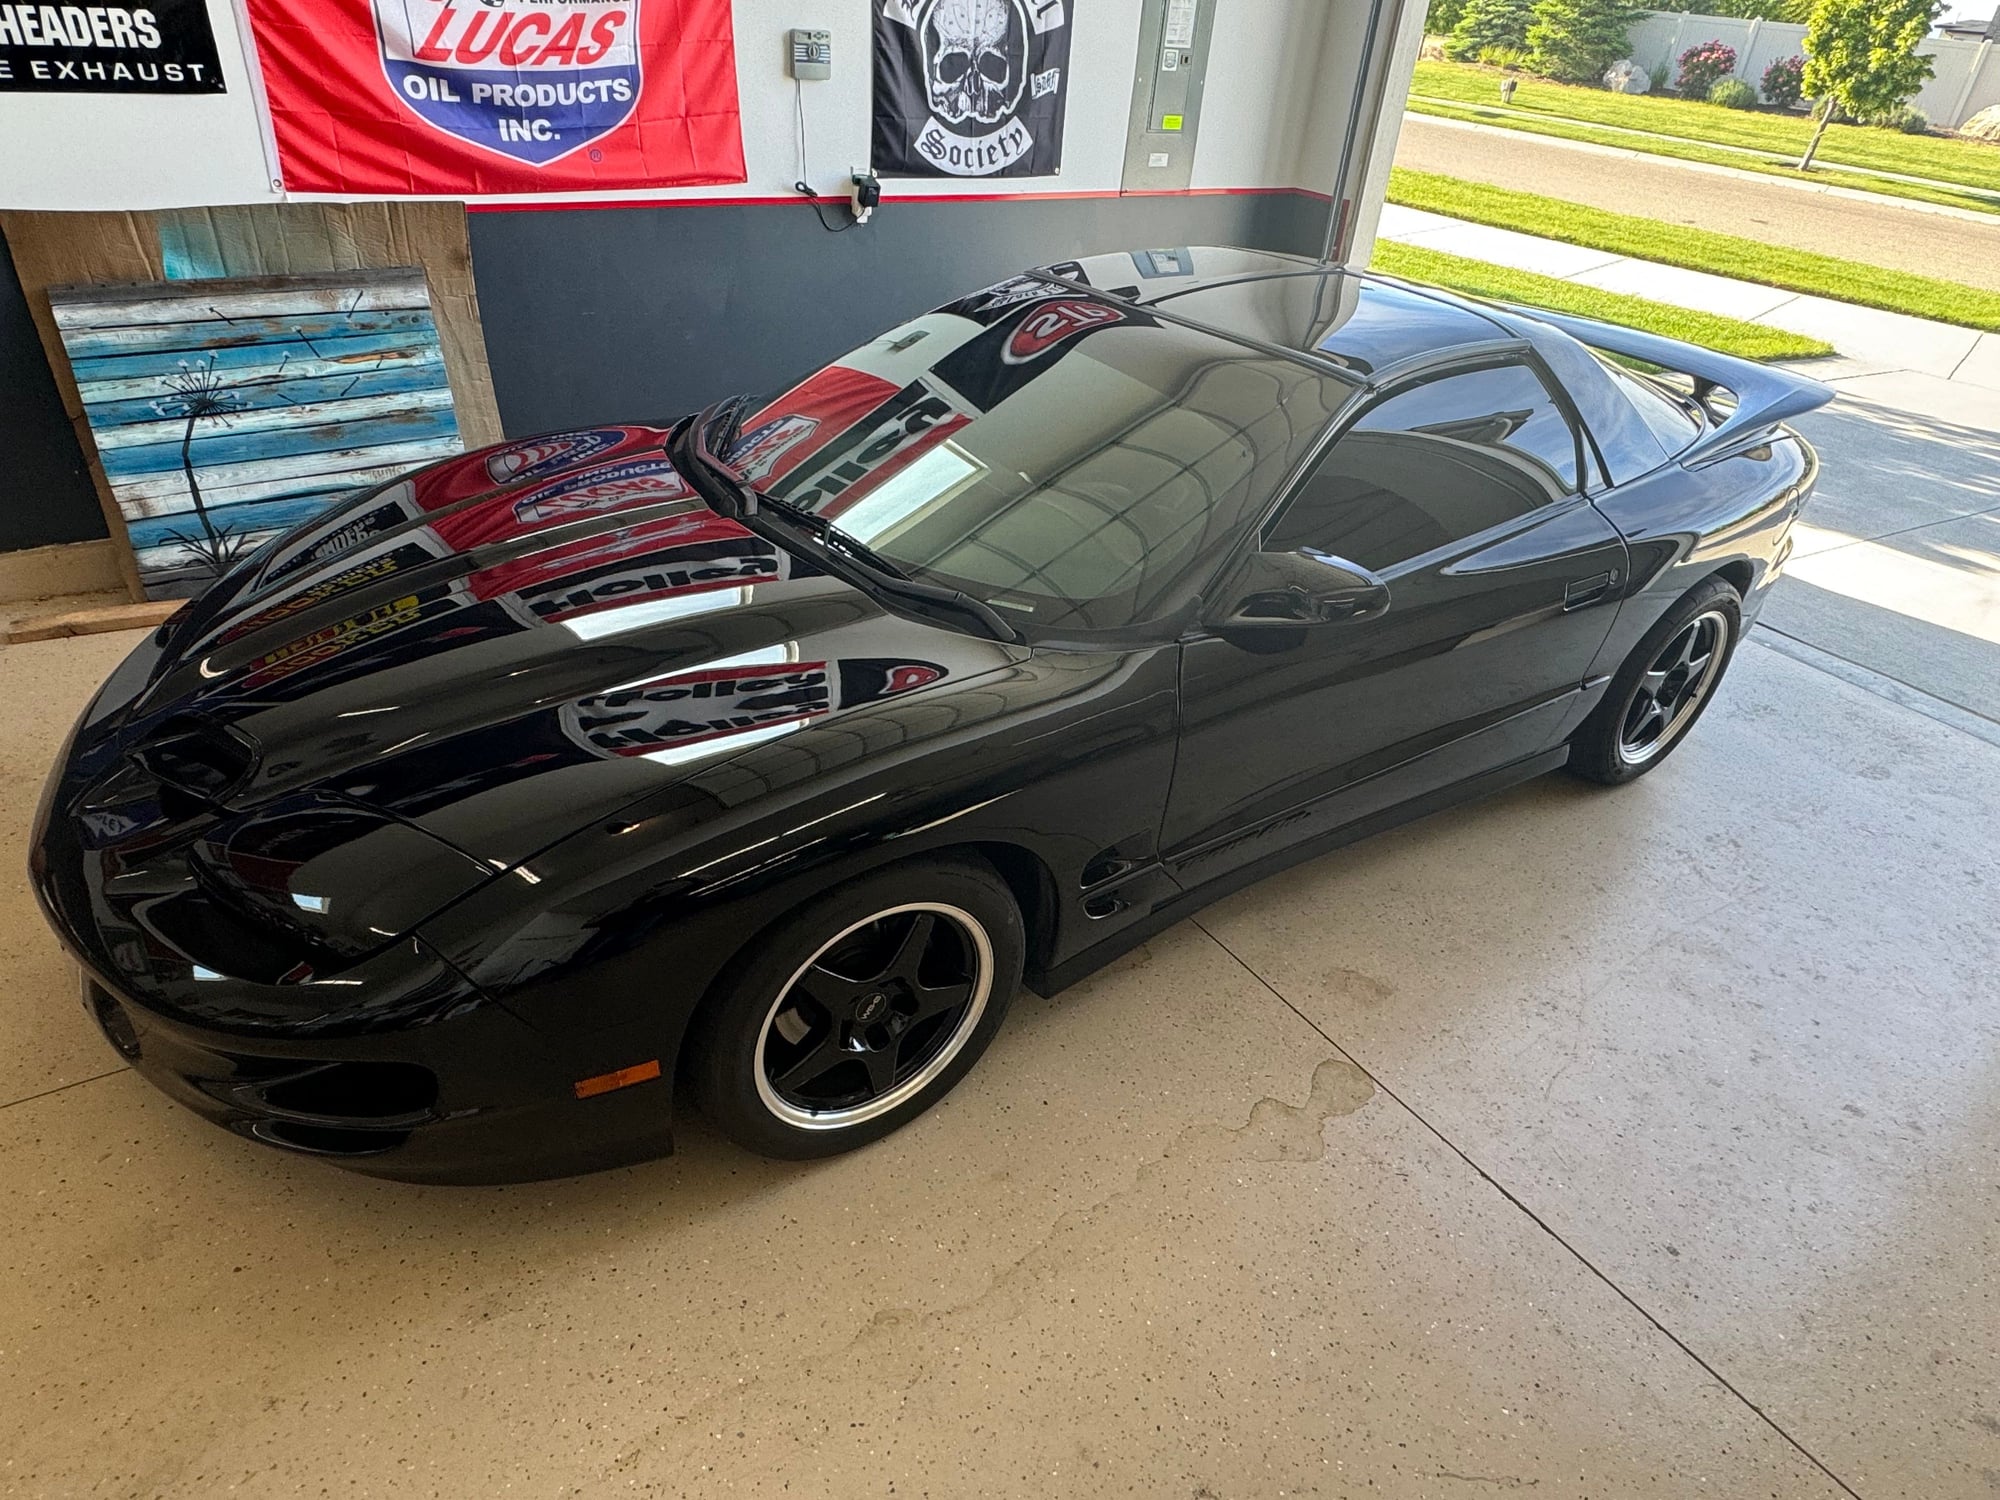 2000 Pontiac Firebird - 2000 Firebird Procharged WS6 600whp - Used - VIN 2g2fv22gxy2137639 - 98,000 Miles - 8 cyl - 2WD - Automatic - Coupe - Black - Meridian, ID 83642, United States